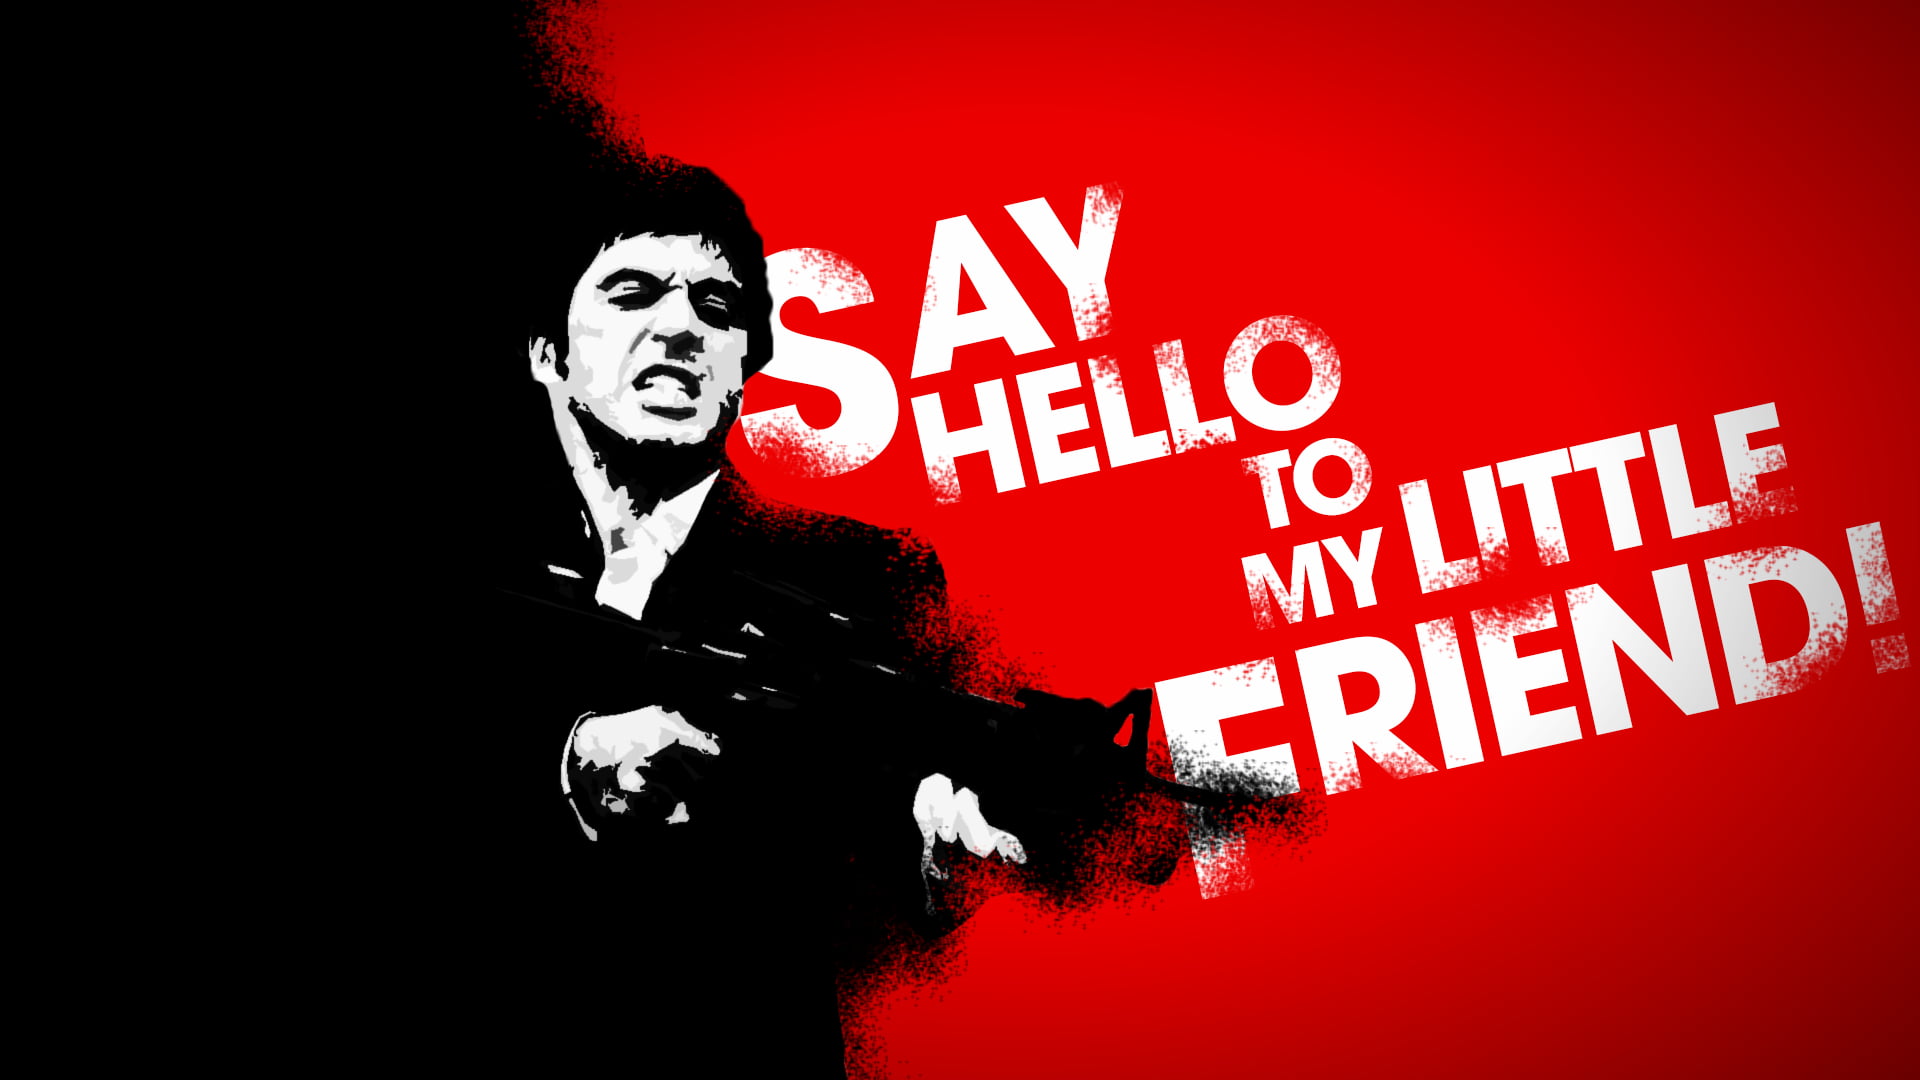 say hello to my little friend illustration, Al Pacino, gangsters